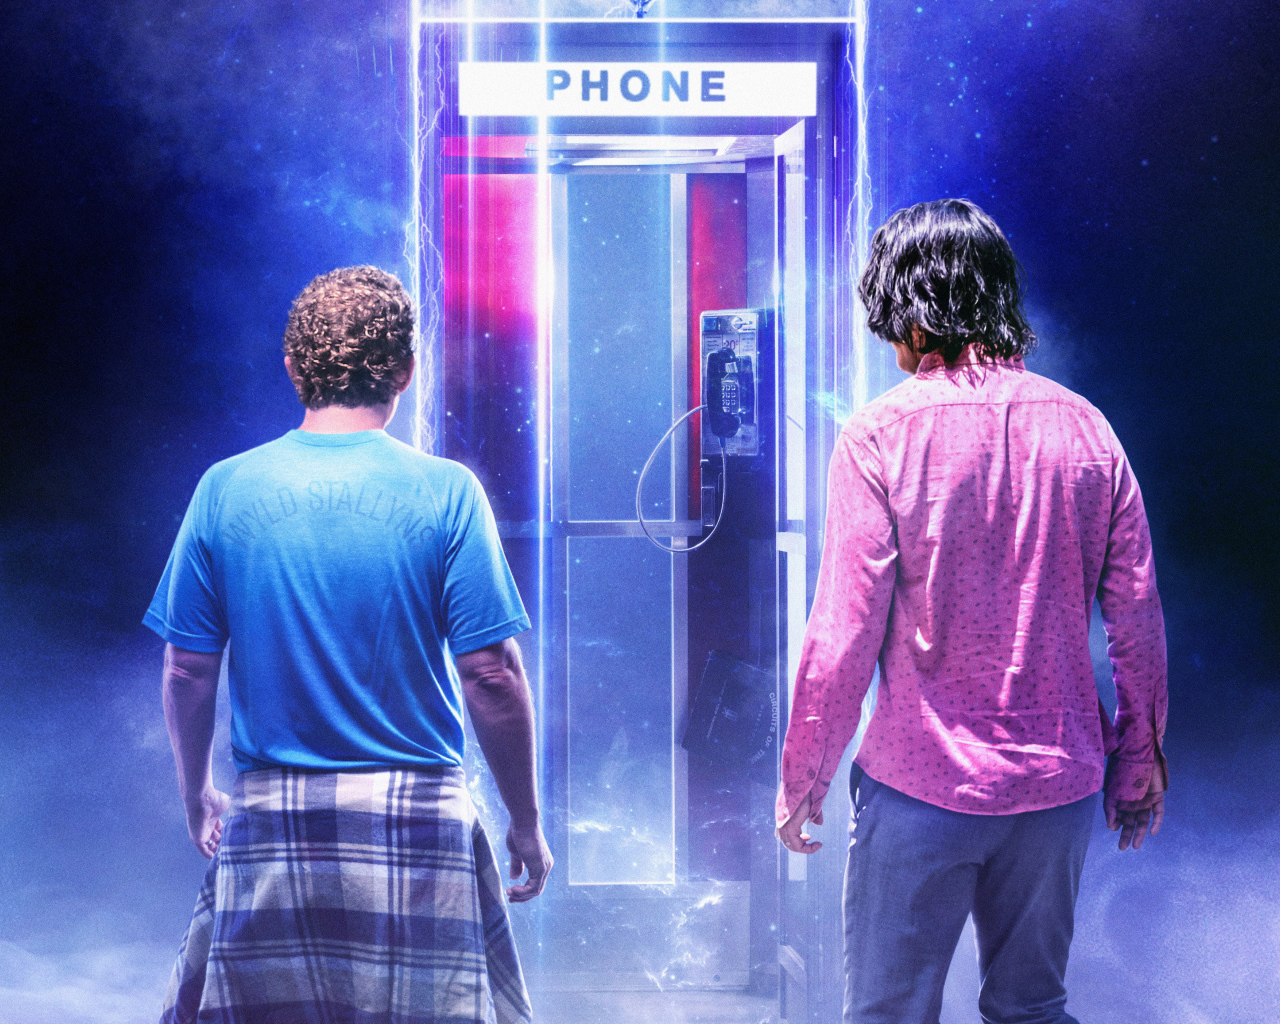 Bill & Ted 2020 movie poster